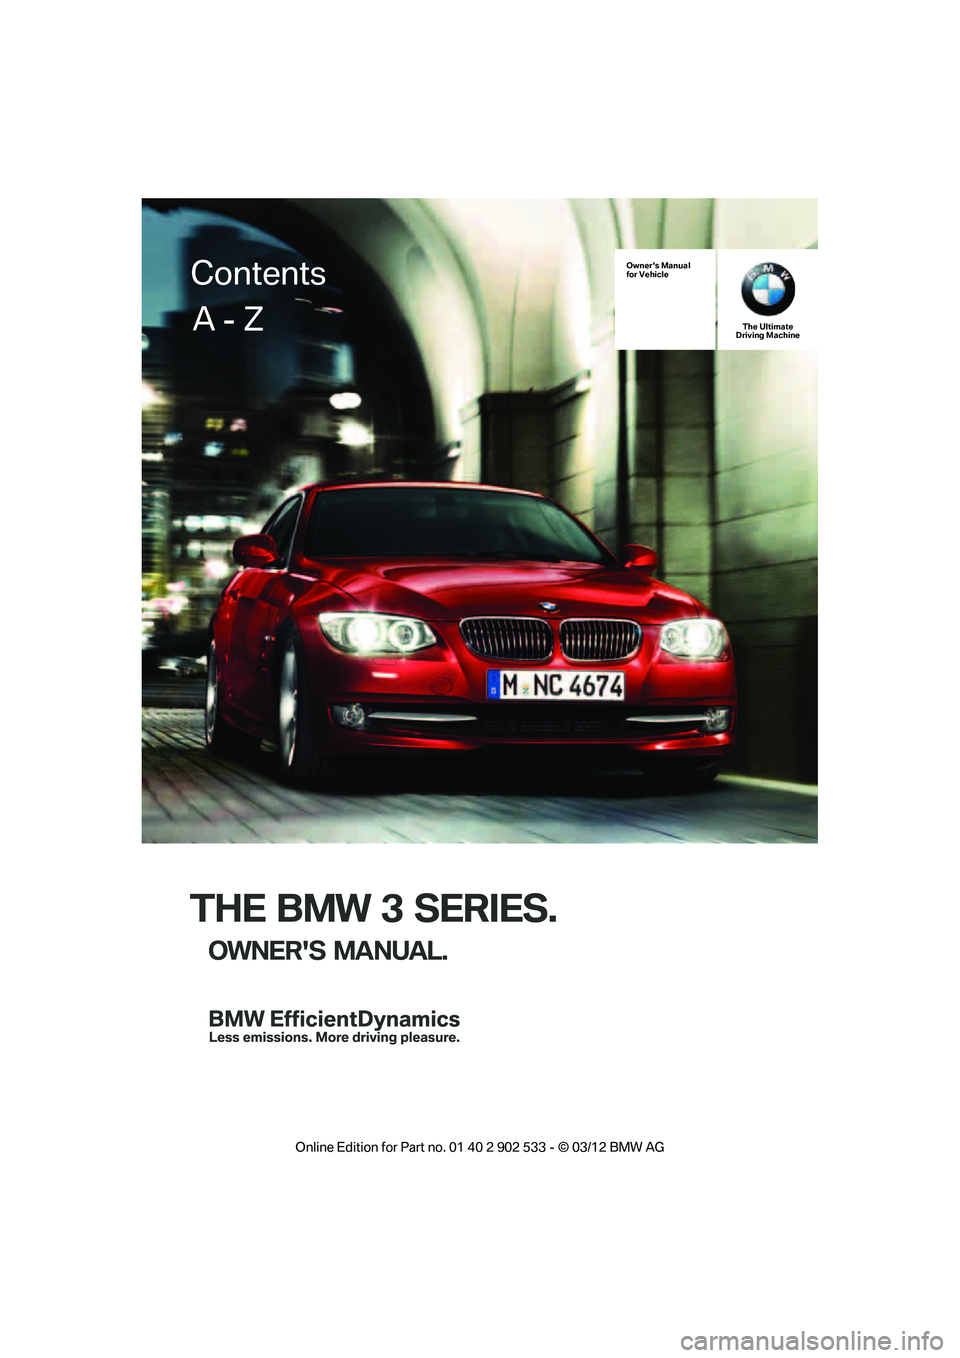 BMW 335I XDRIVE COUPE 2013  Owners Manual THE BMW 3 SERIES.
OWNERS MANUAL.
Owners Manual
for VehicleThe Ultimate
Driving Machine
Contents
A - Z

00320051004F004C00510048000300280047004C0057004C005200510003  